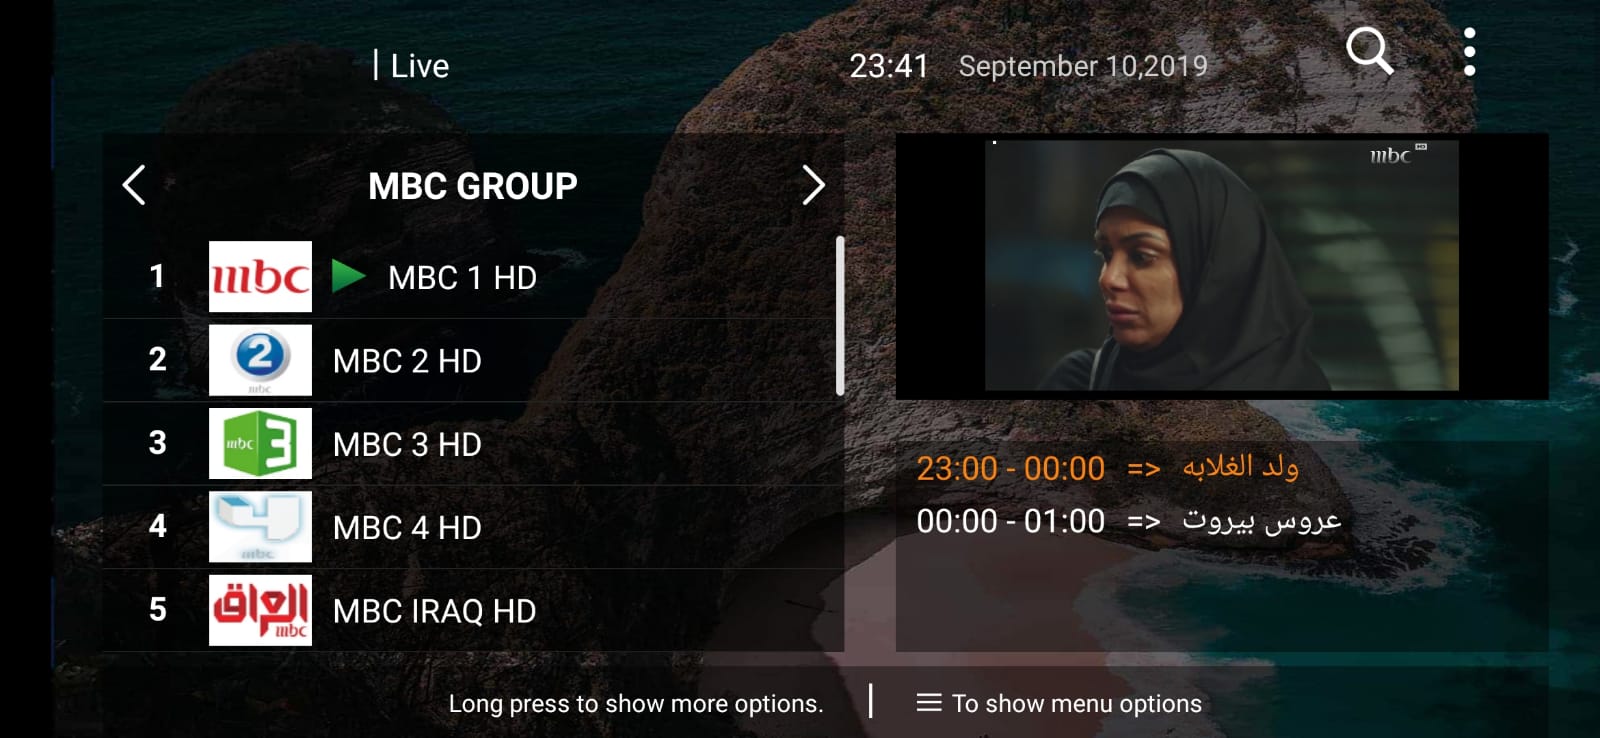 Live_TV_With_EPG_1